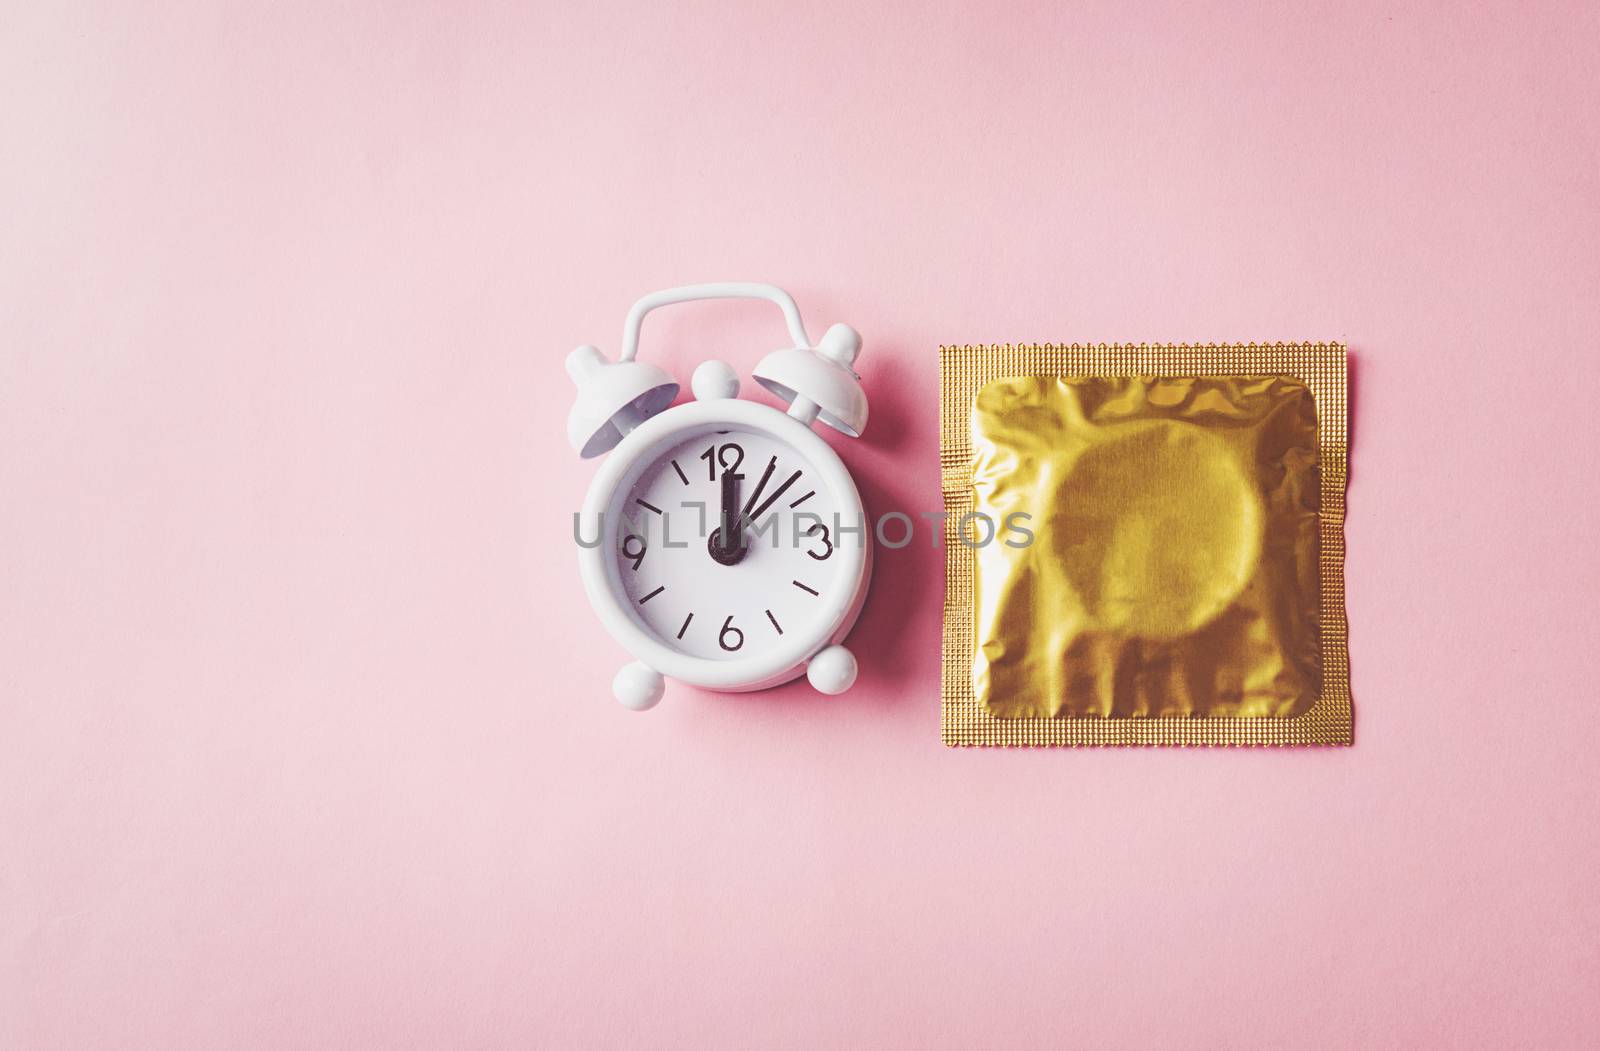 condom in wrapper pack and Alarm clock by Sorapop